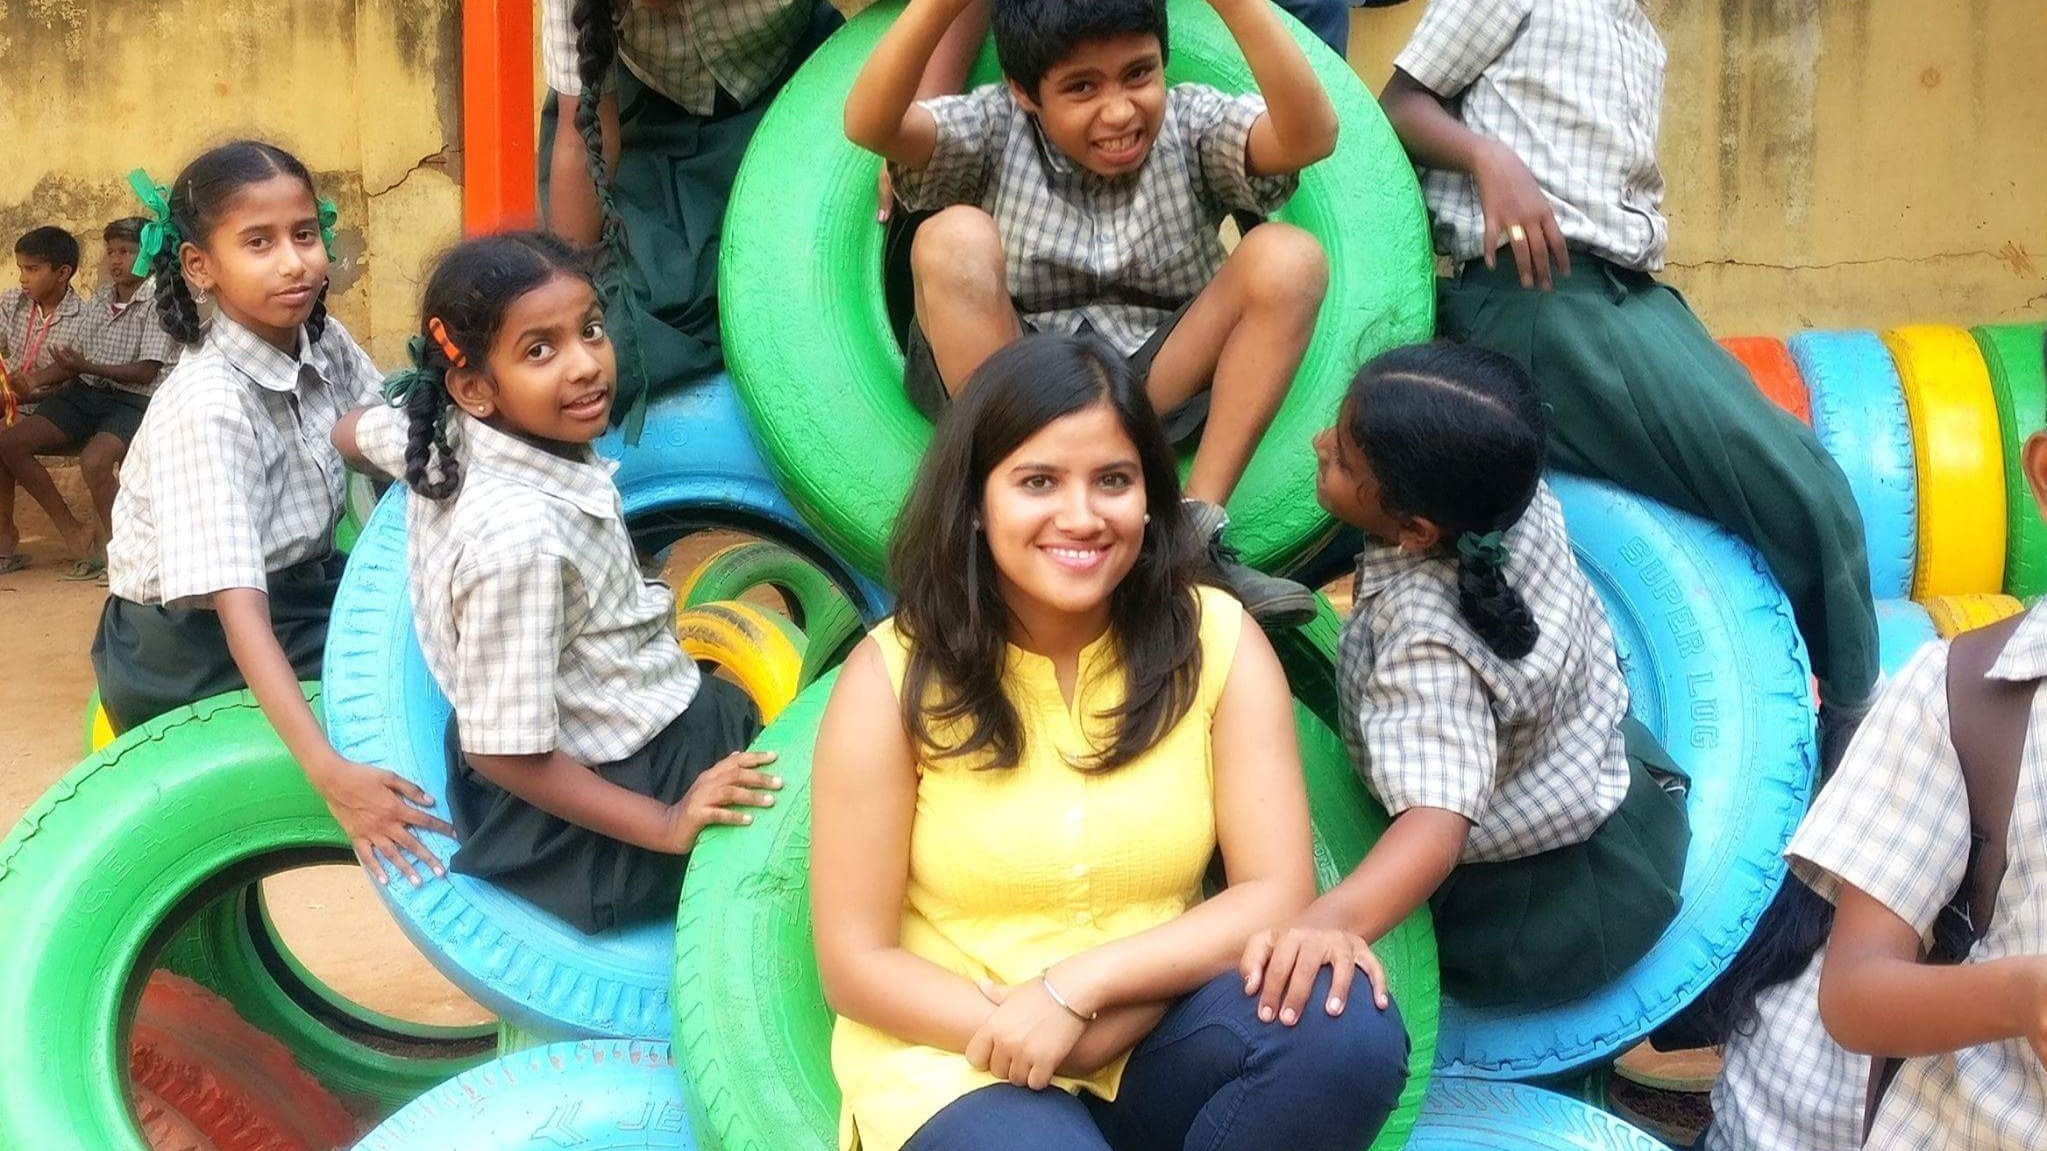 IITian Ditches Rs 20 Lakh Salary To Build Playgrounds For Underprivileged Children